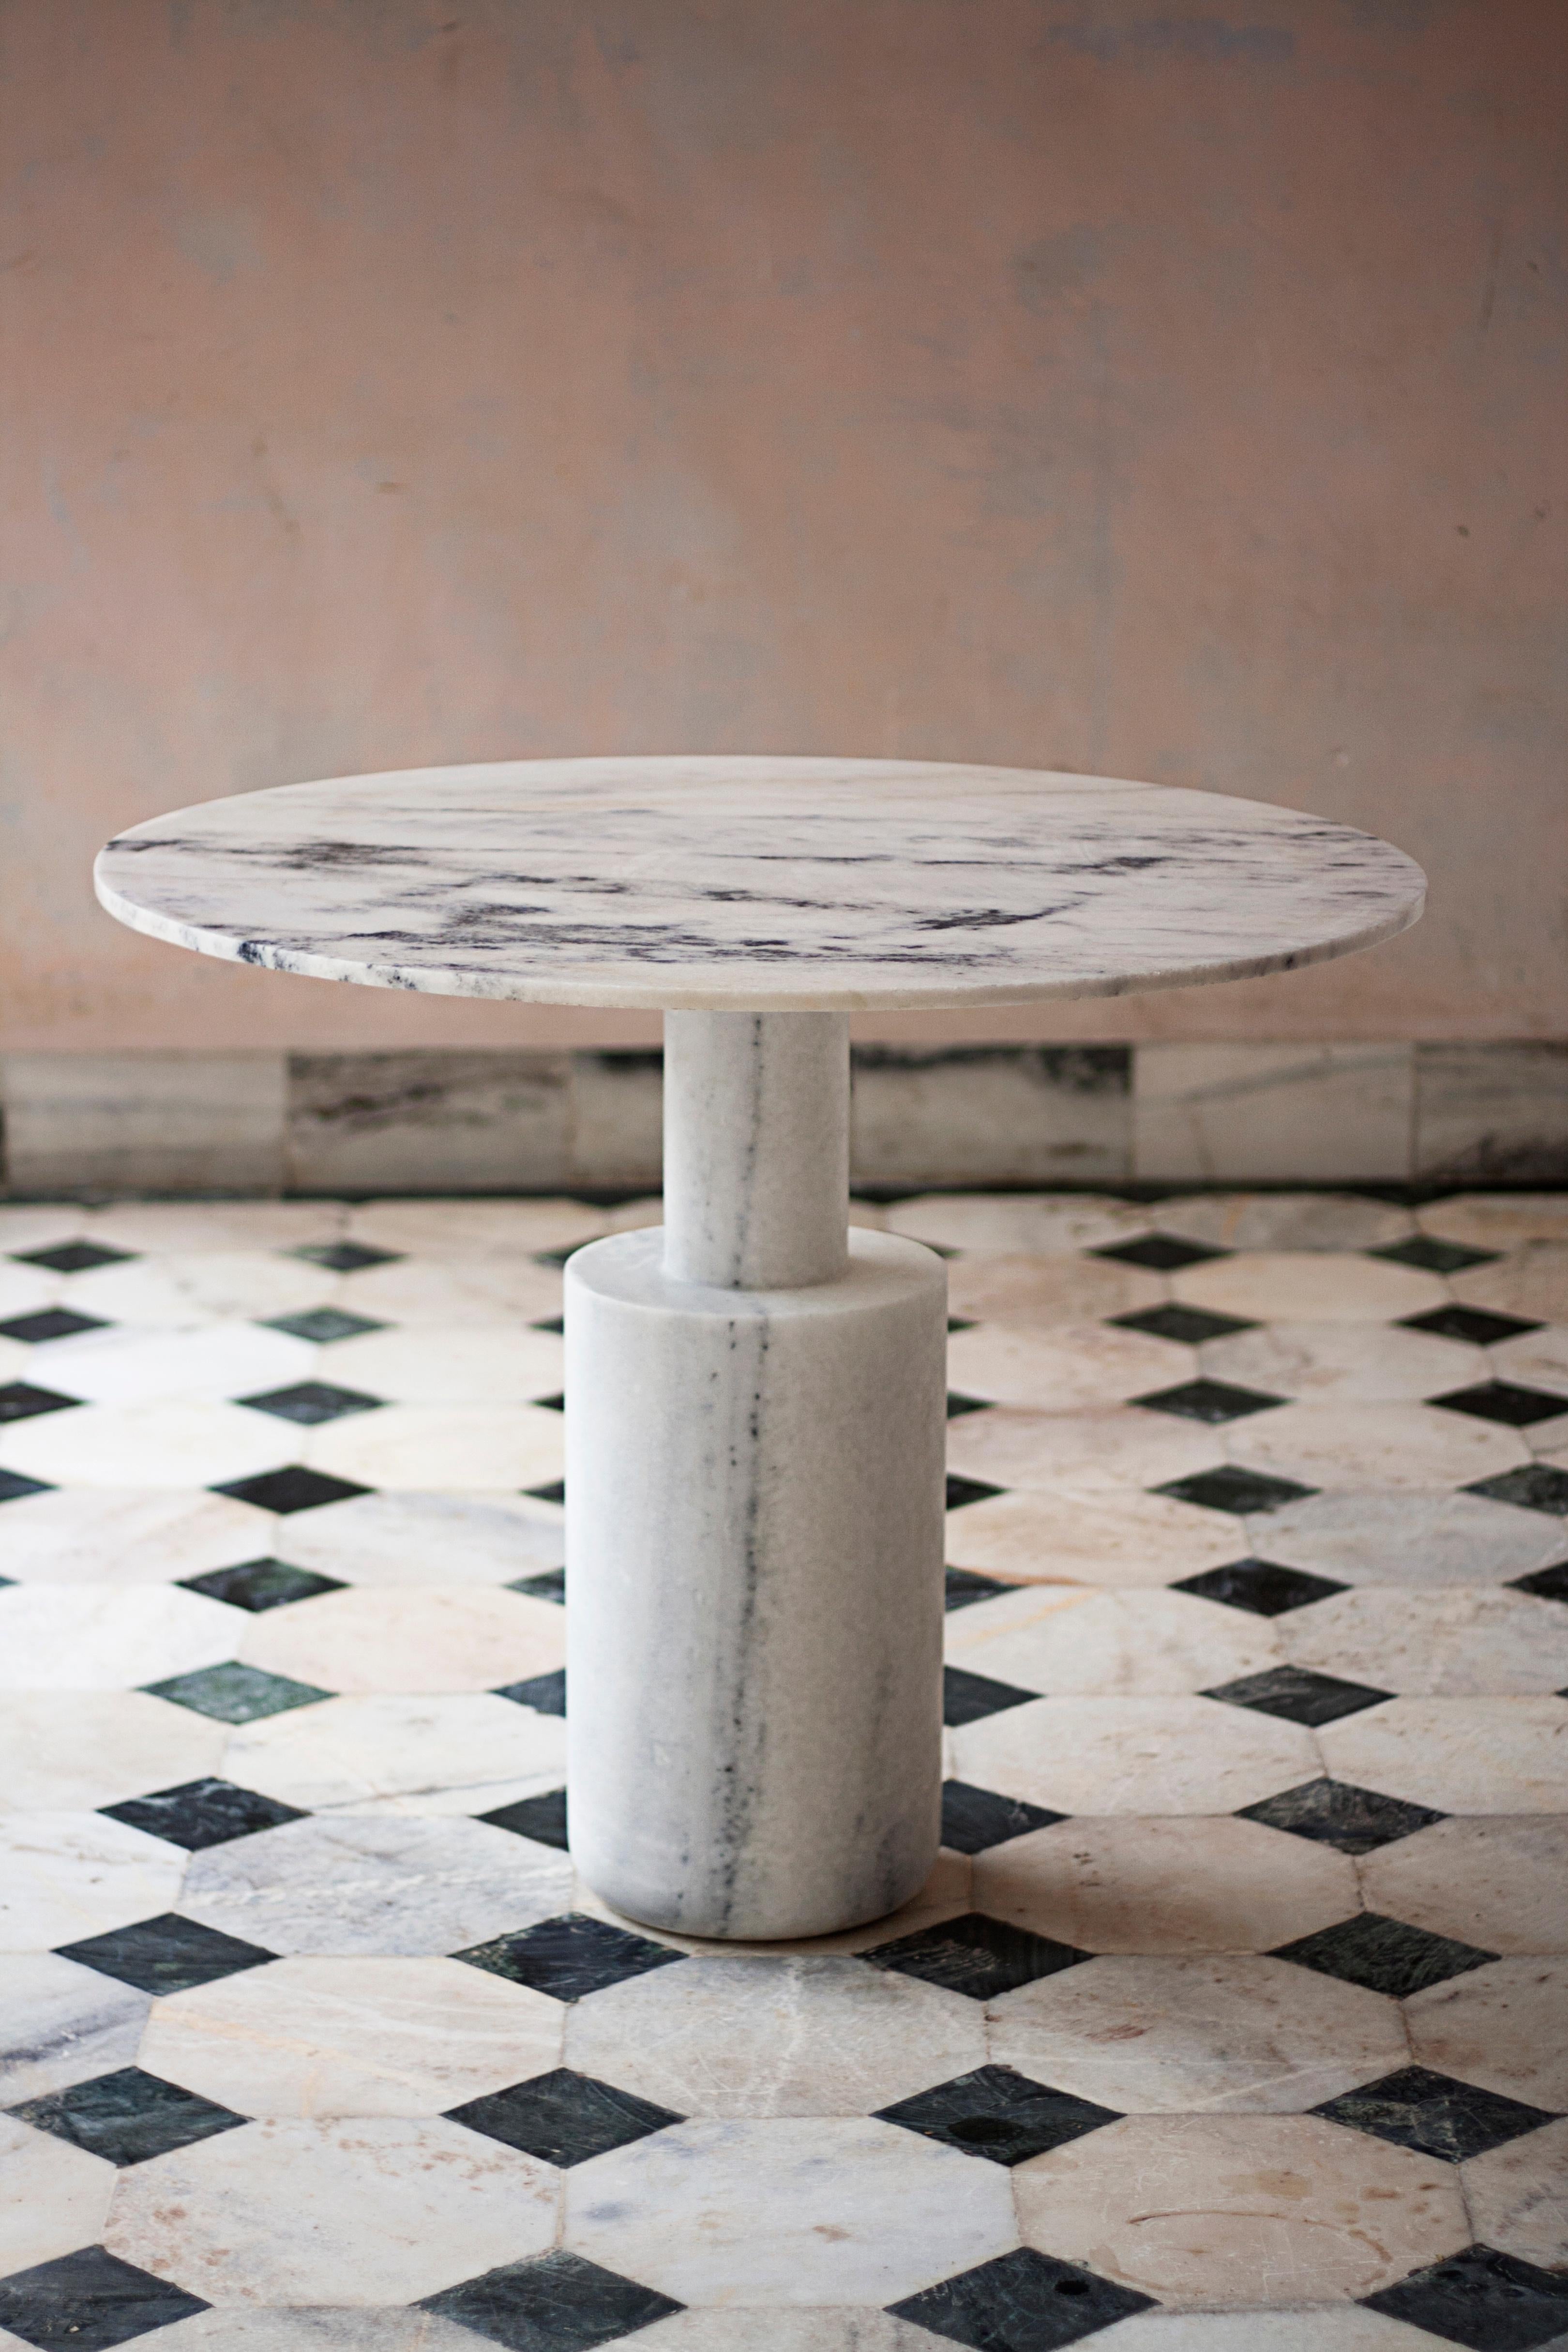 Nimbus table in mist white marble by Raw Material

The contrast between soft lines and hard material make sure that the Nimbus table is something to remember. 

A simple way to make any room unique and special. 

This dining / occasional table